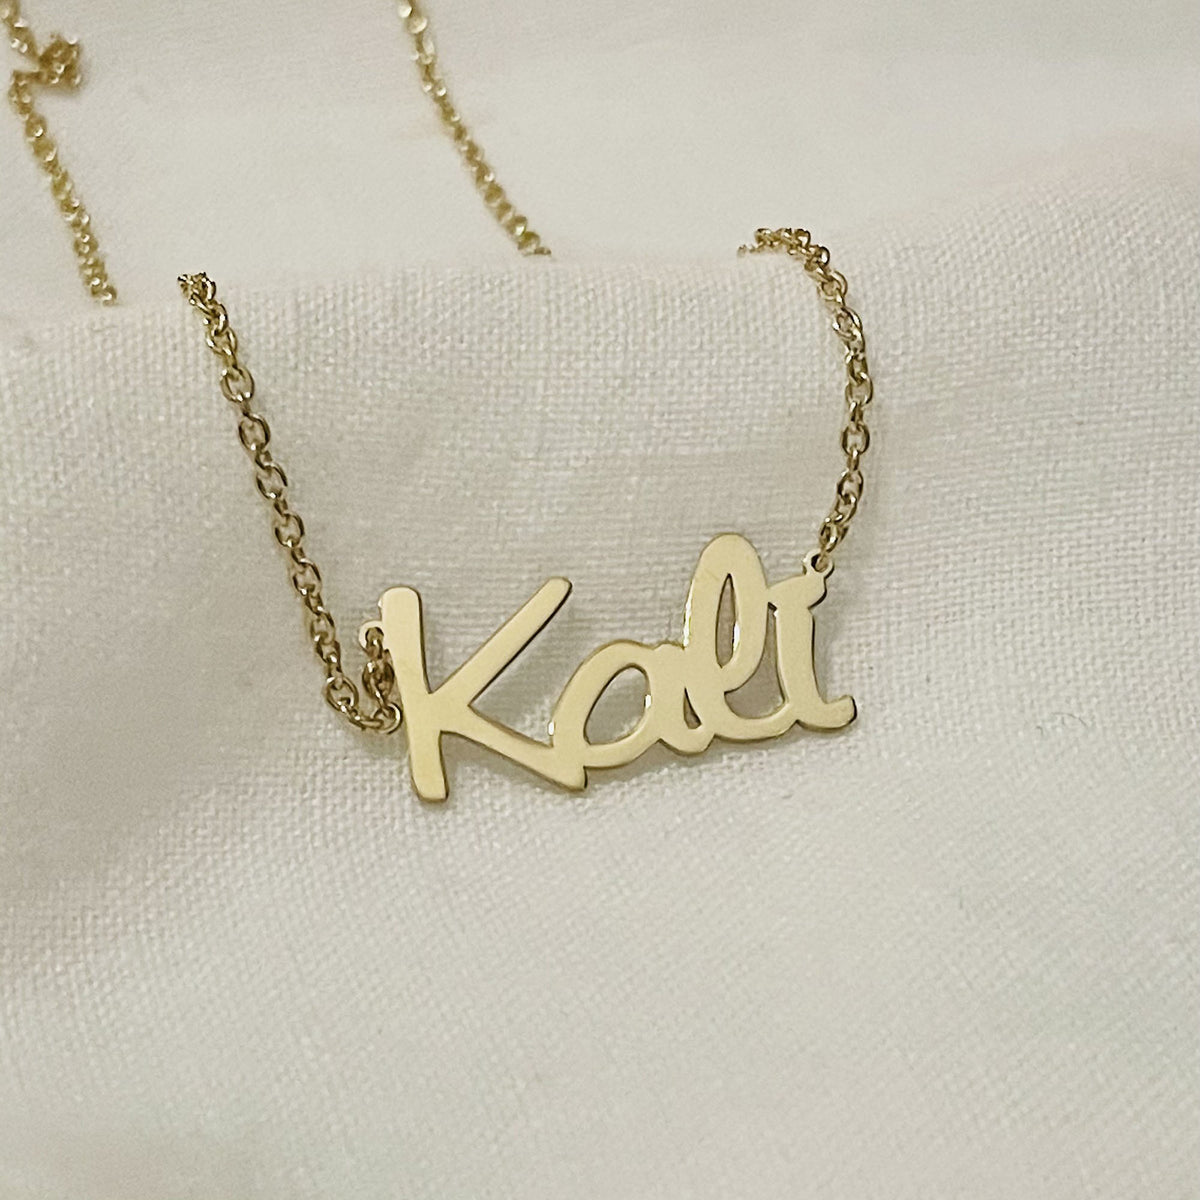 Block Personalized Name Necklace Veilchen Style- Available in 14k, 10k & Sterling Silver (width: 1.2 inches )